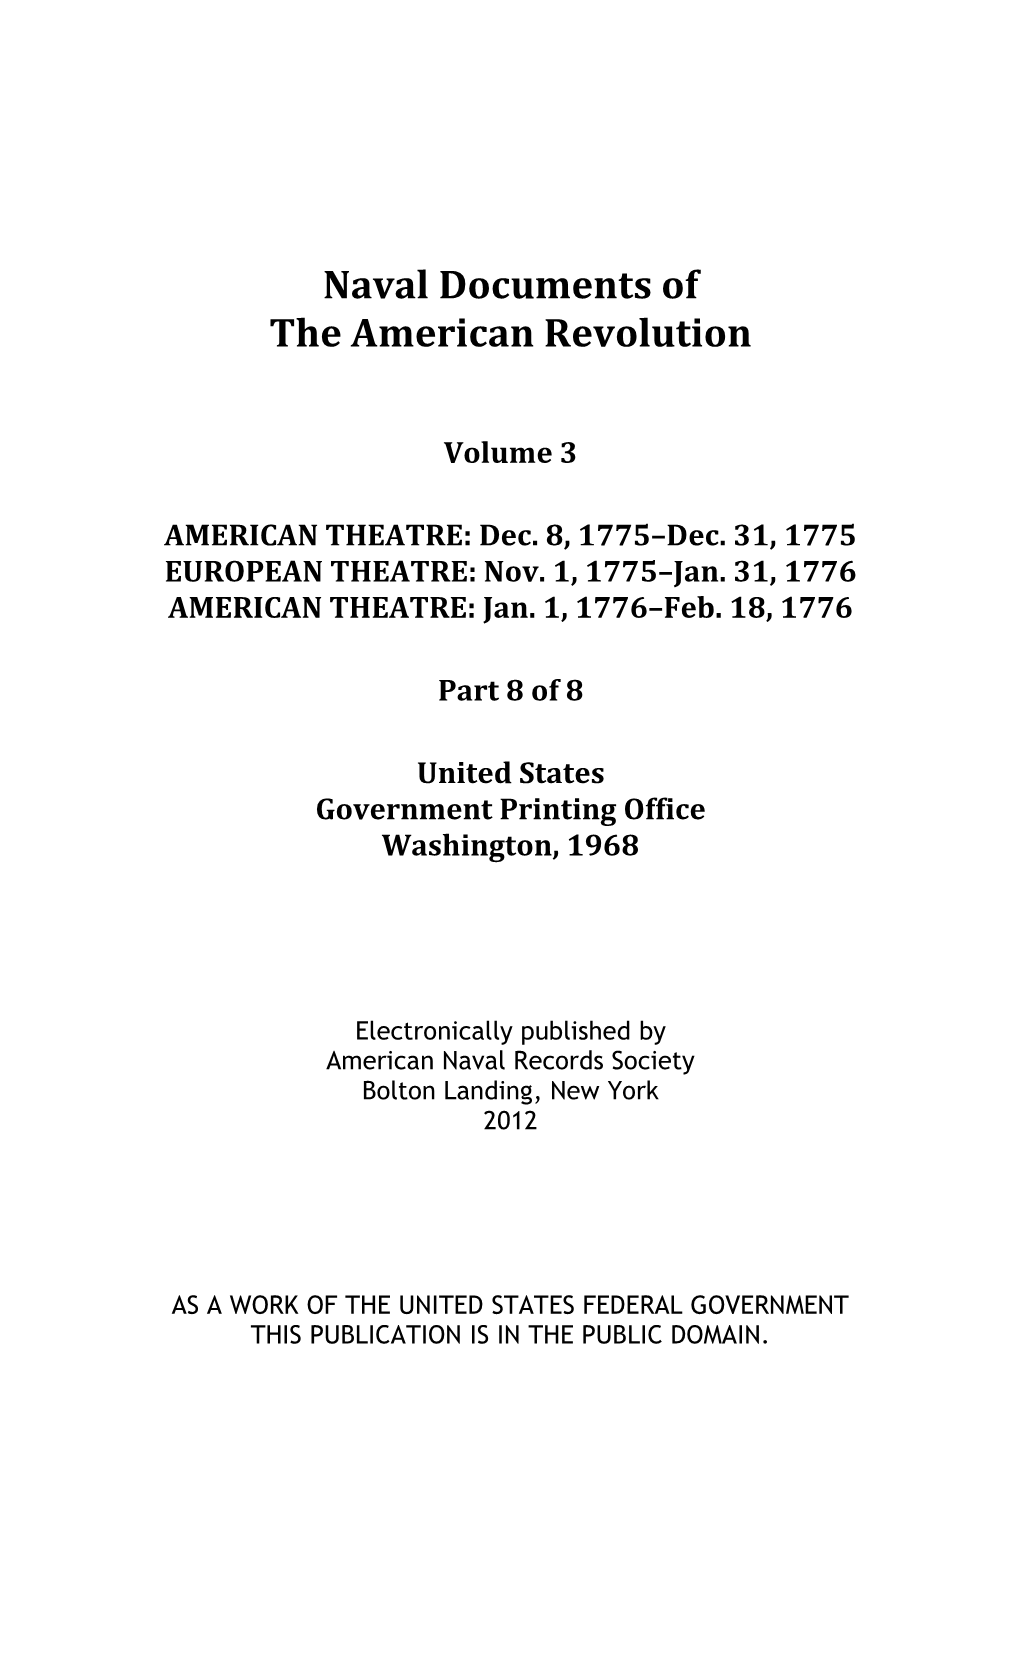 Naval Documents of the American Revolution, Volume 3, Part 8